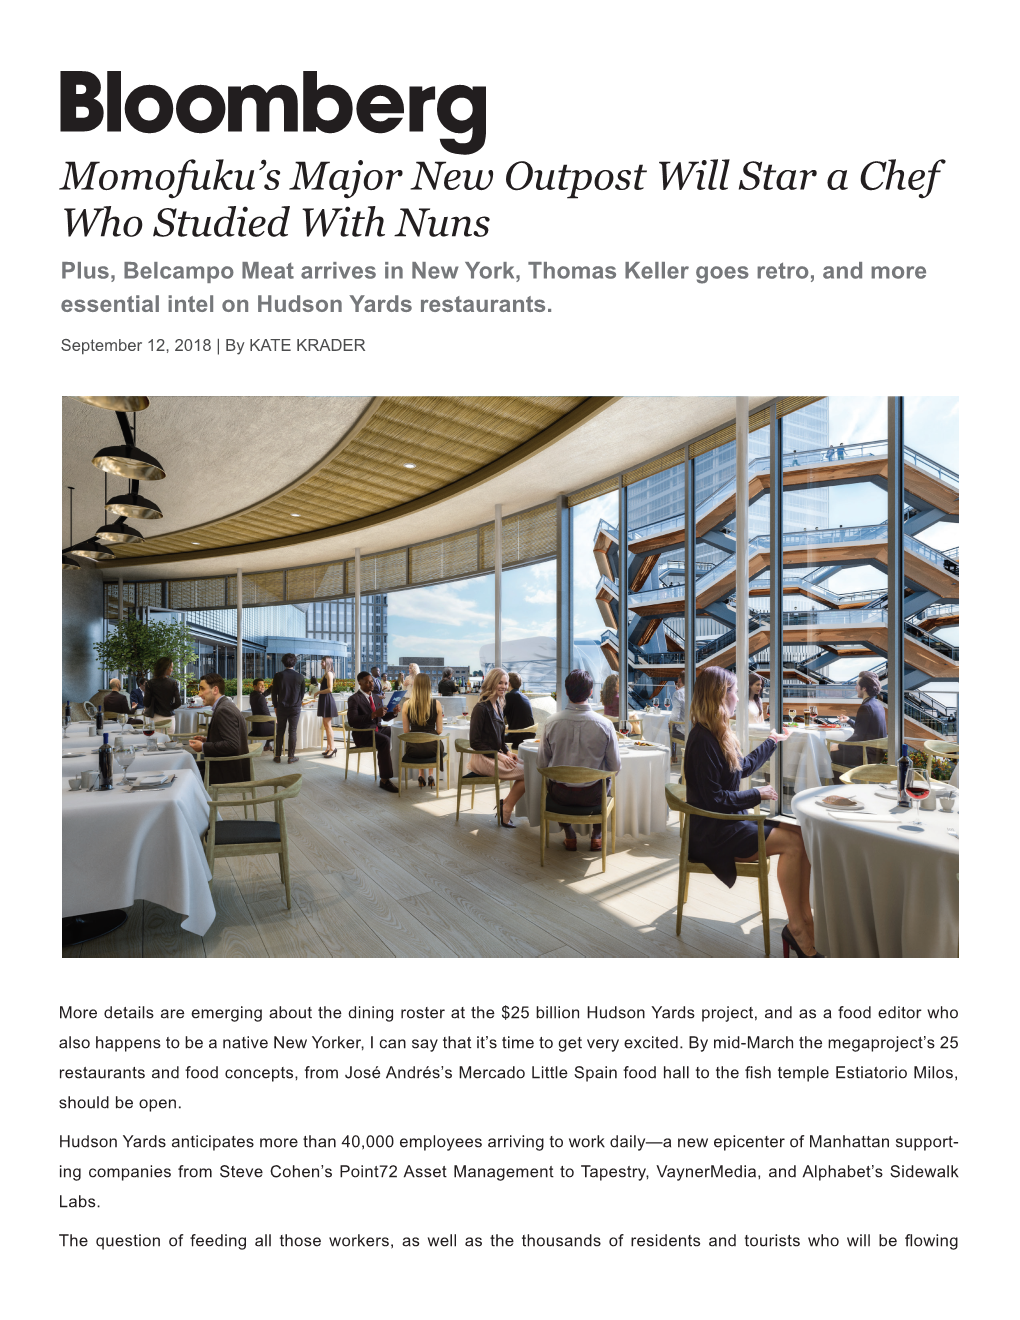 Momofuku's Major New Outpost Will Star a Chef Who Studied with Nuns